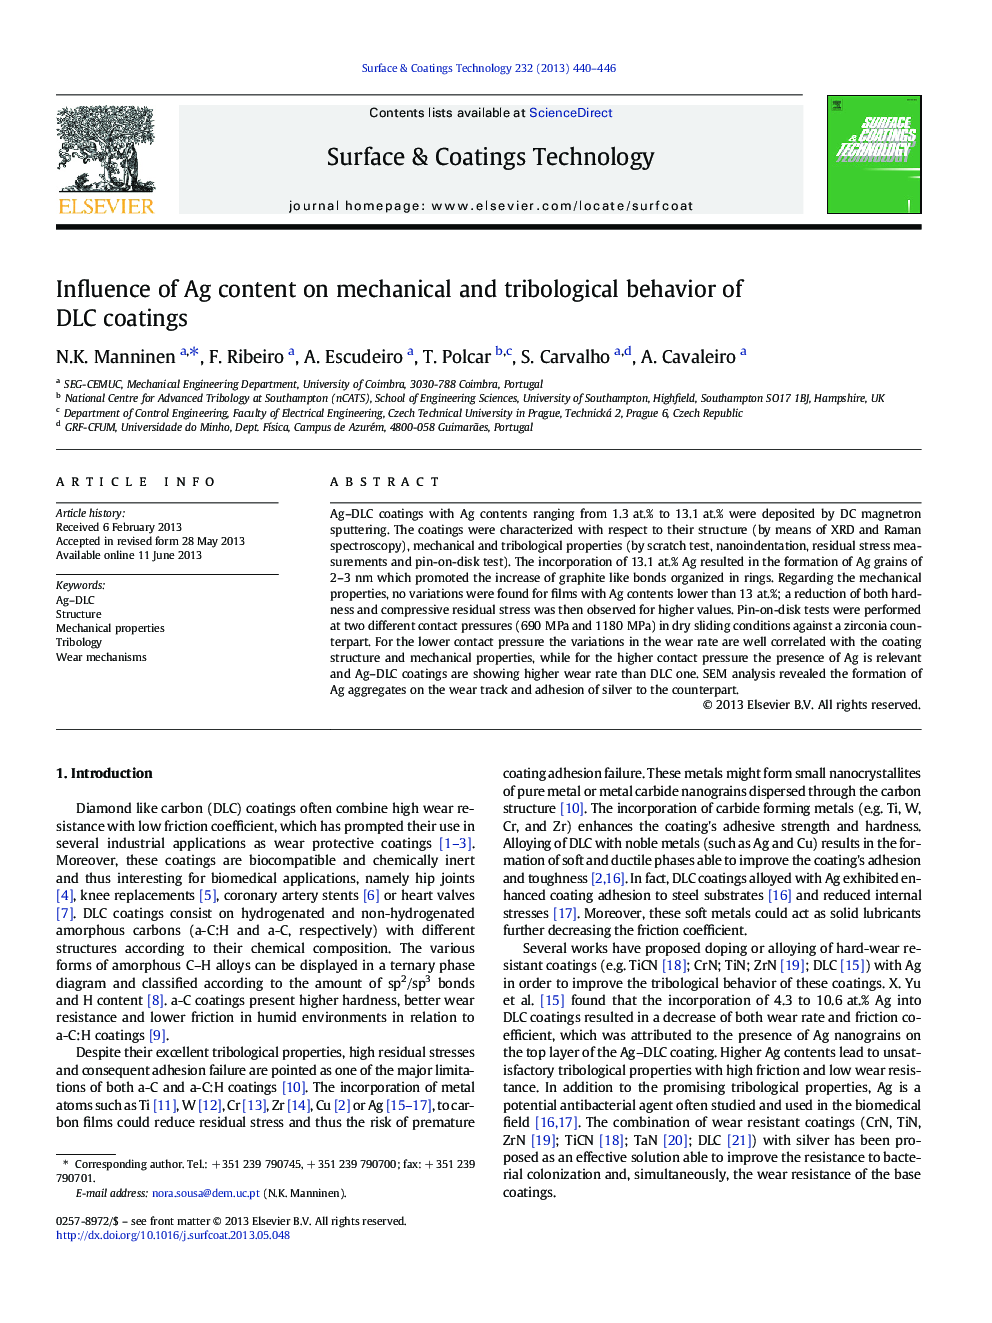 Influence of Ag content on mechanical and tribological behavior of DLC coatings